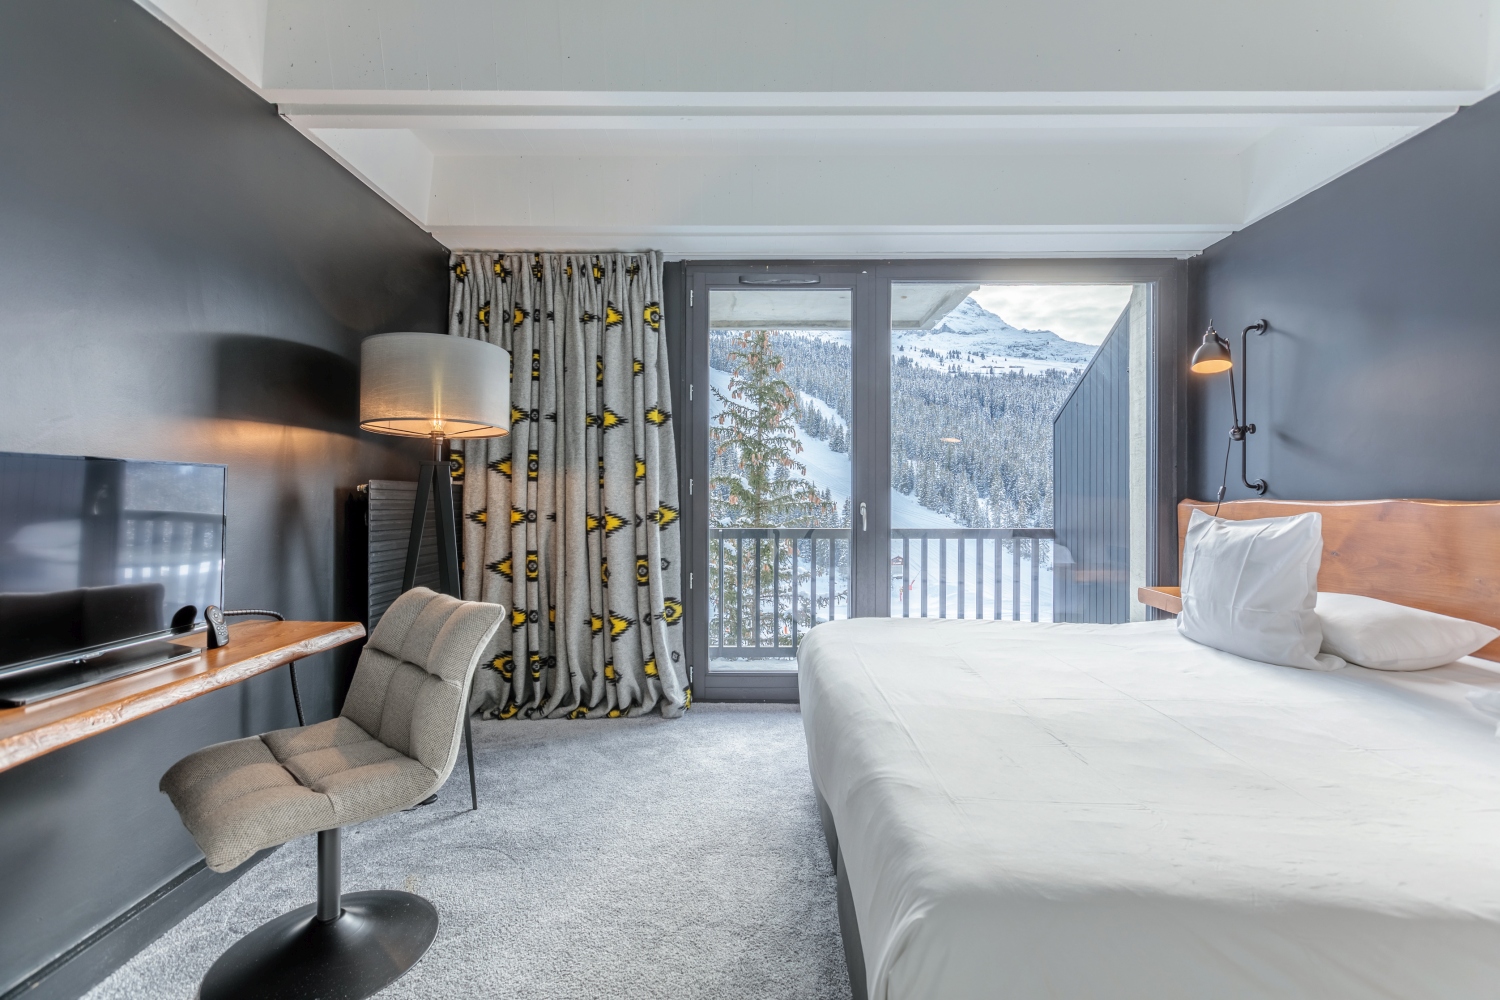 Room in Hotel Totem Neige - Flaine, France